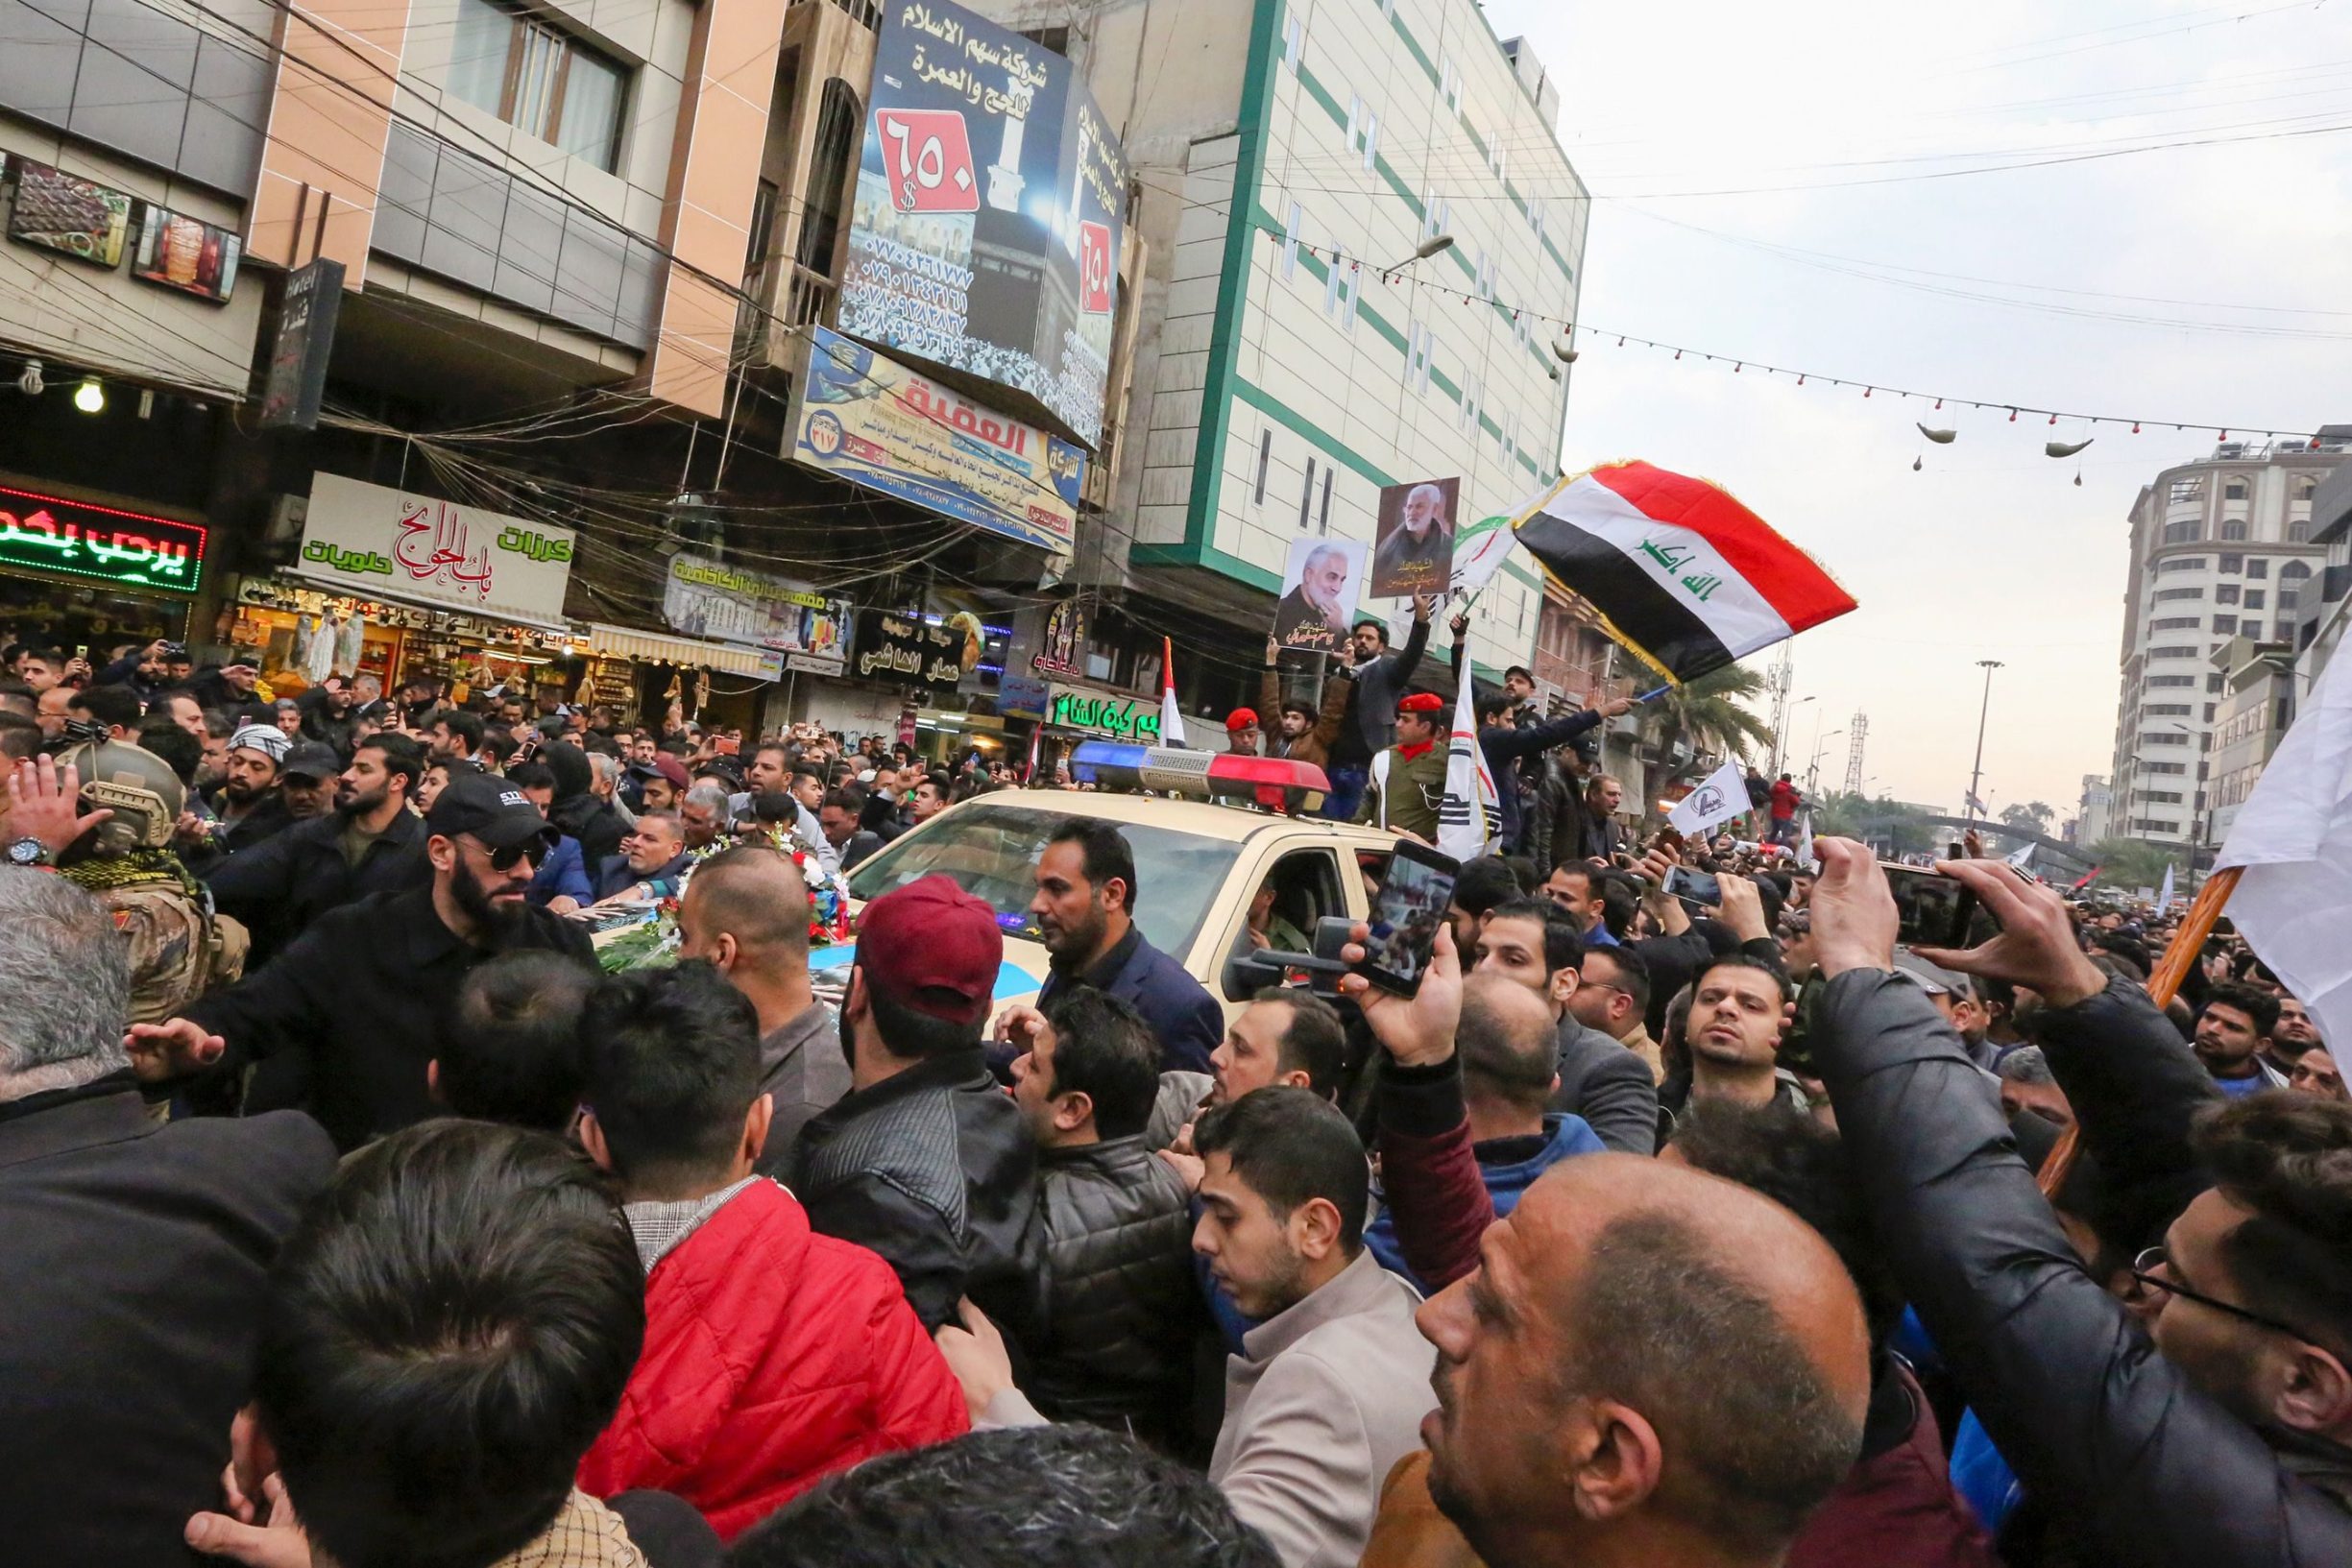 Mourners attend a funeral procession for Iraqi paramilitary chief Abu Mahdi al-Muhandis and Iranian military commander Qasem Soleimani, in Kadhimiya, a Shiite pilgrimage district of Baghdad, on January 4, 2020. - Thousands of Iraqis chanting 